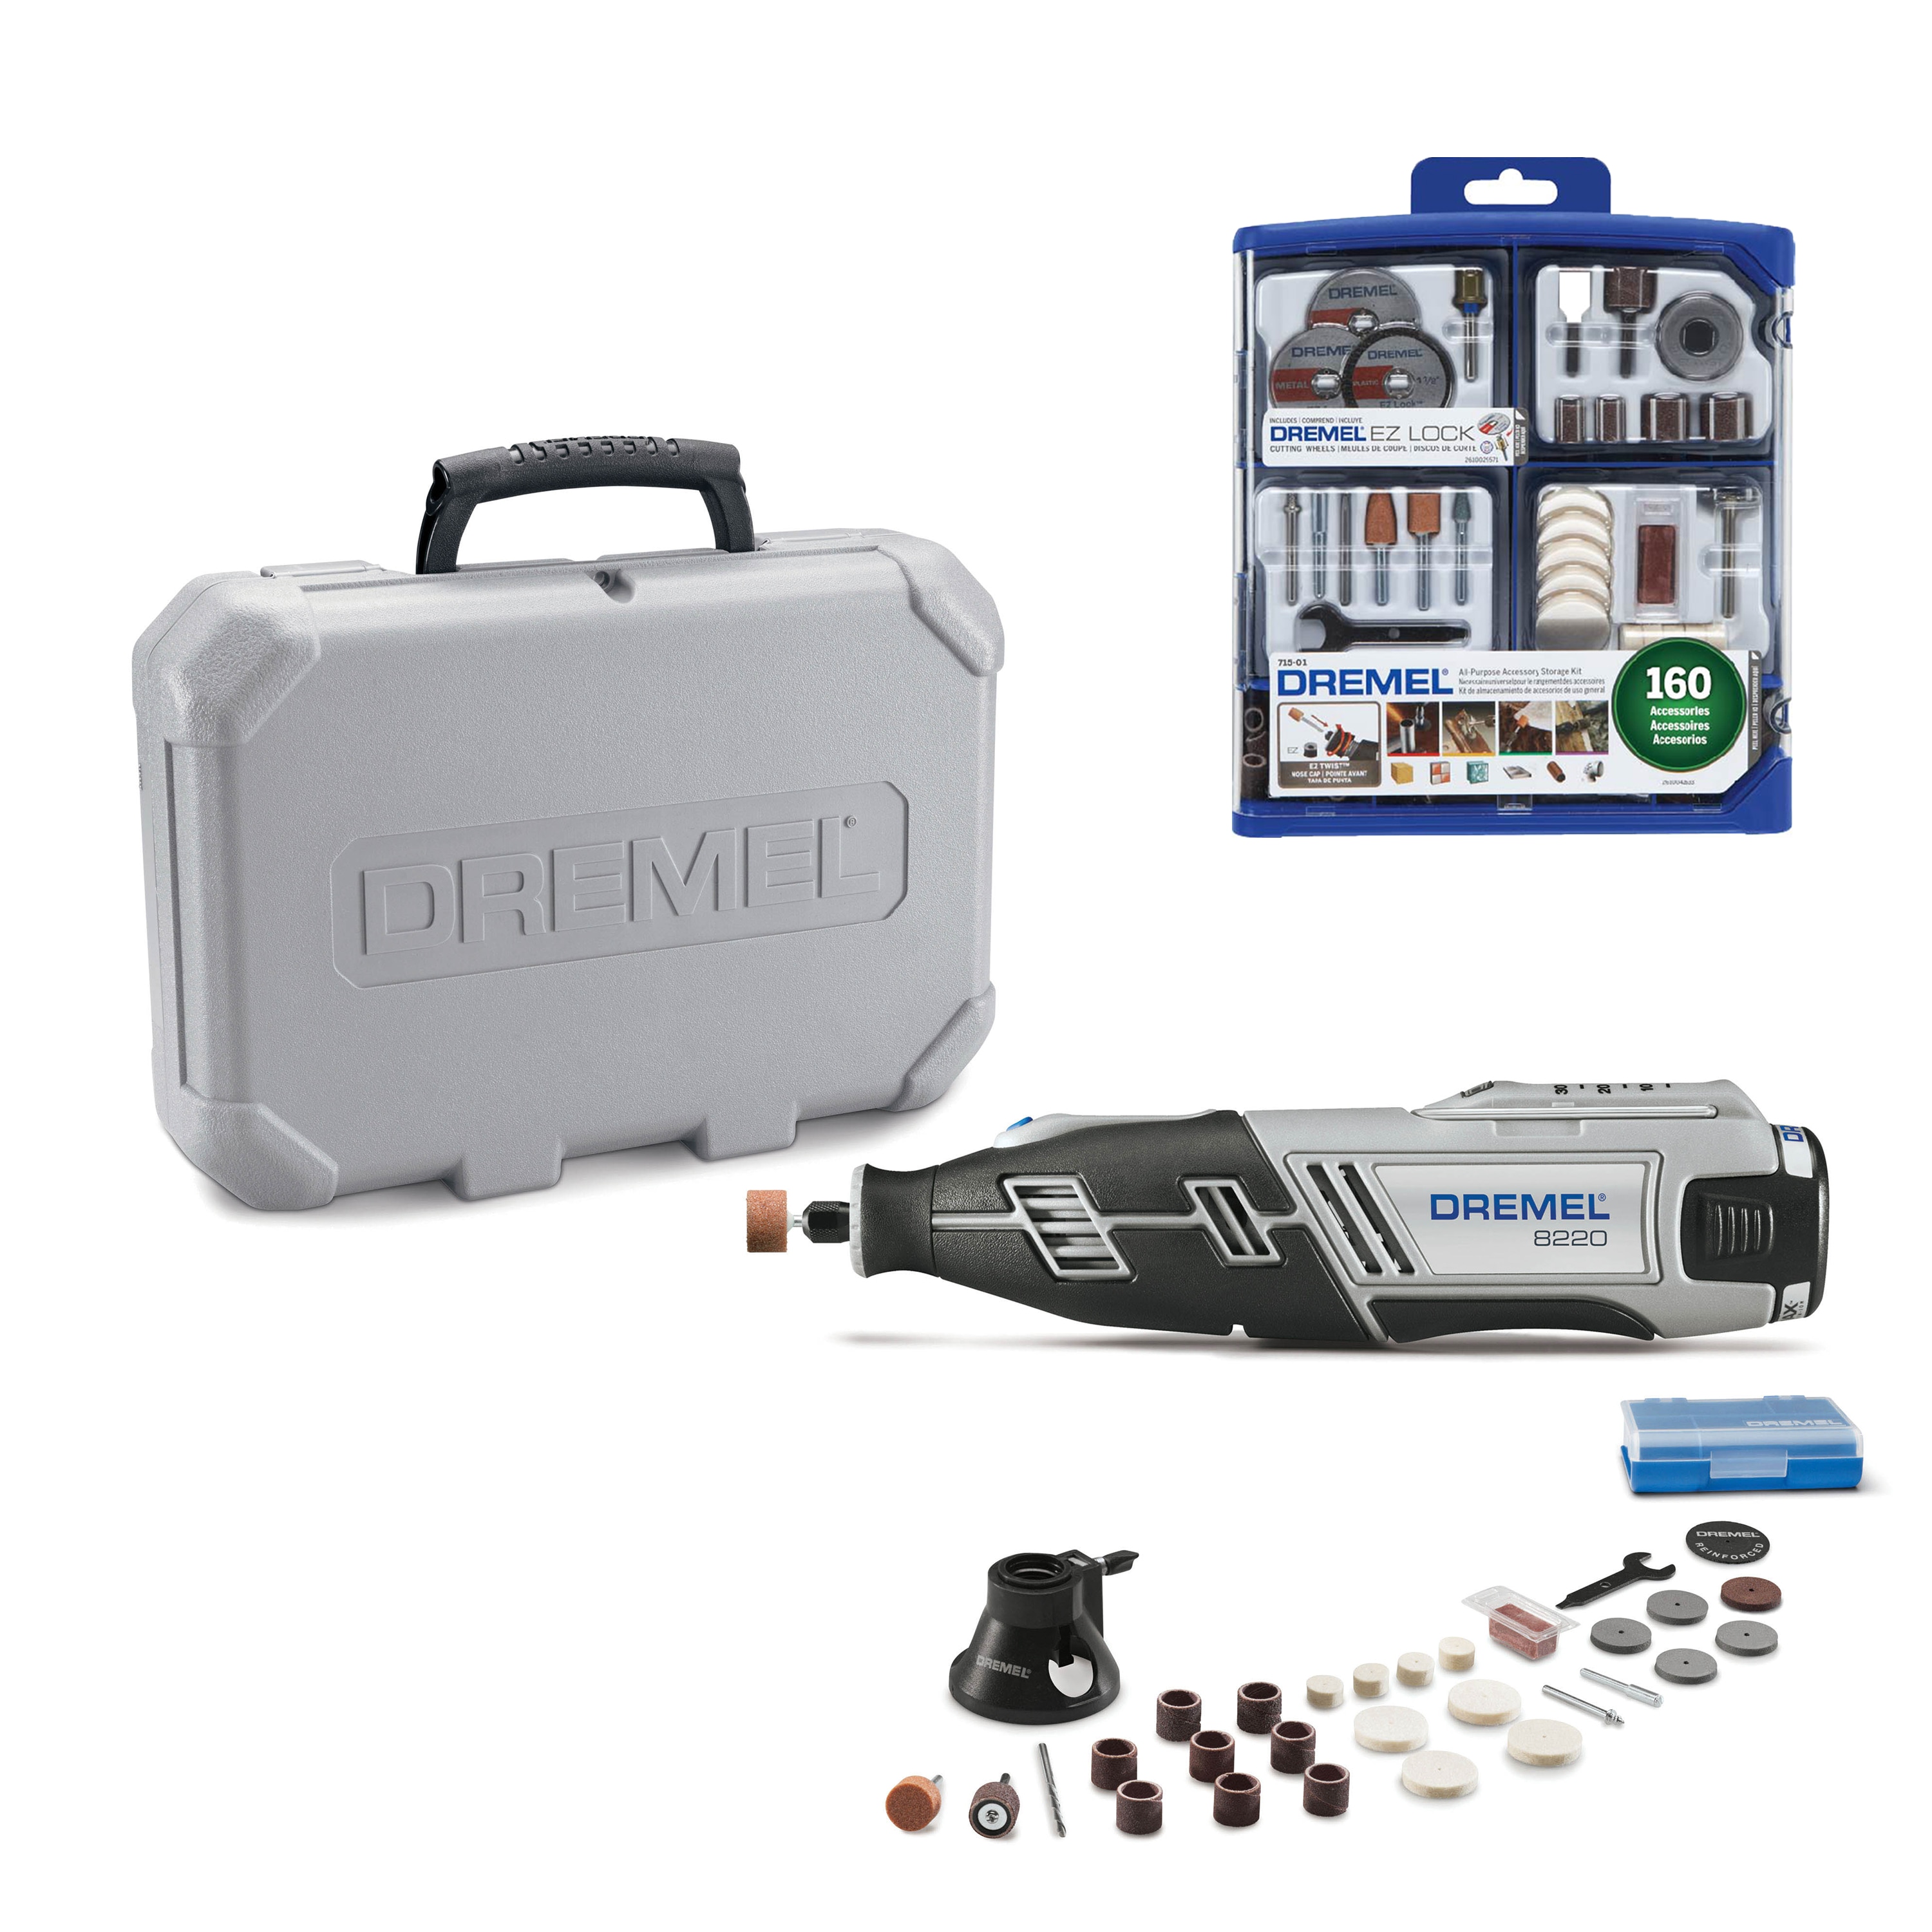 Shop Dremel 8220 Cordless 12V Variable Speed Rotary Tool with 1